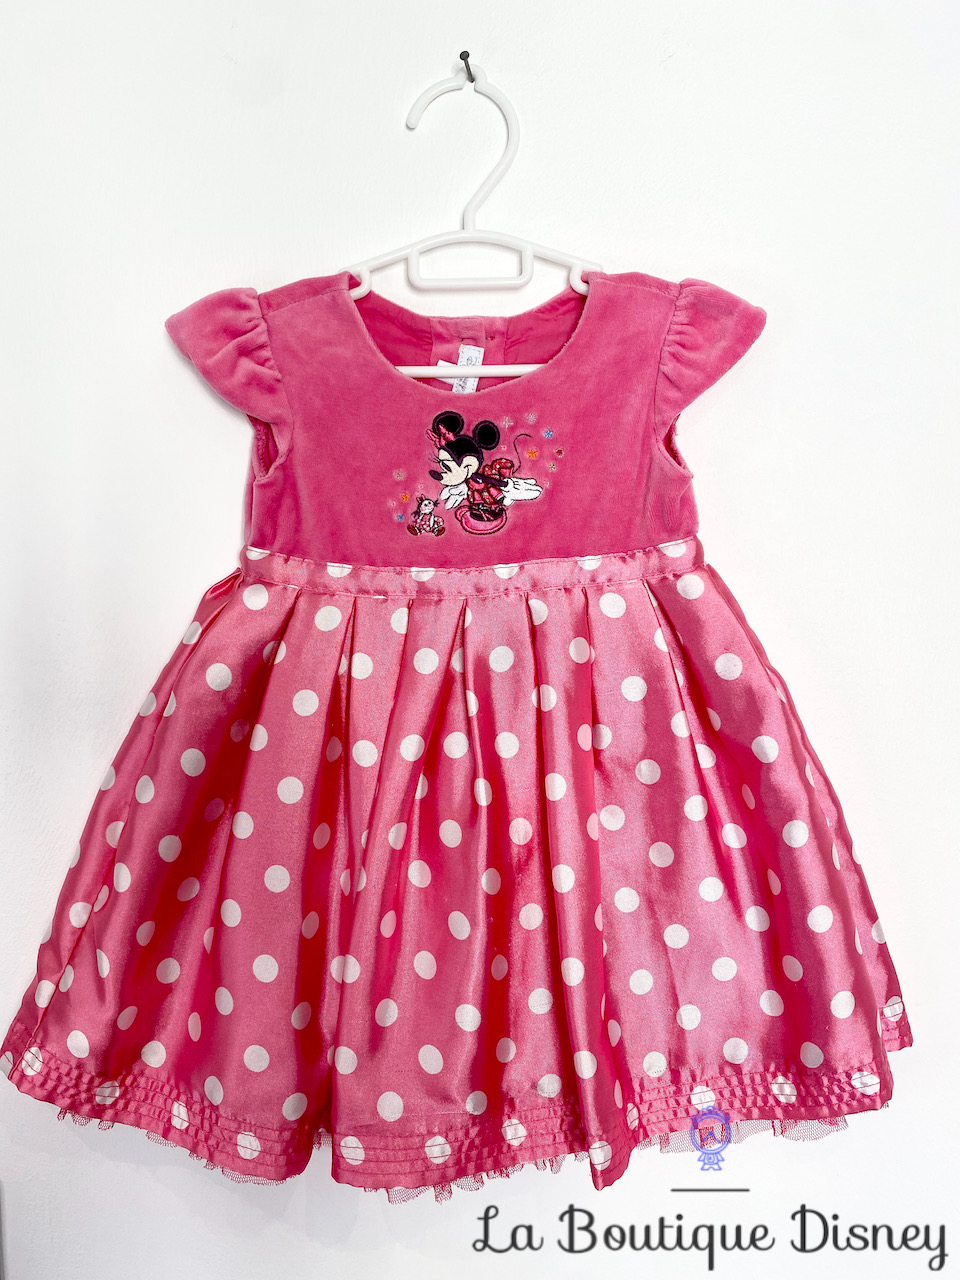 robe-minnie-mouse-disney-store-rose-pois-blanc-broderie-jupon-velour-5